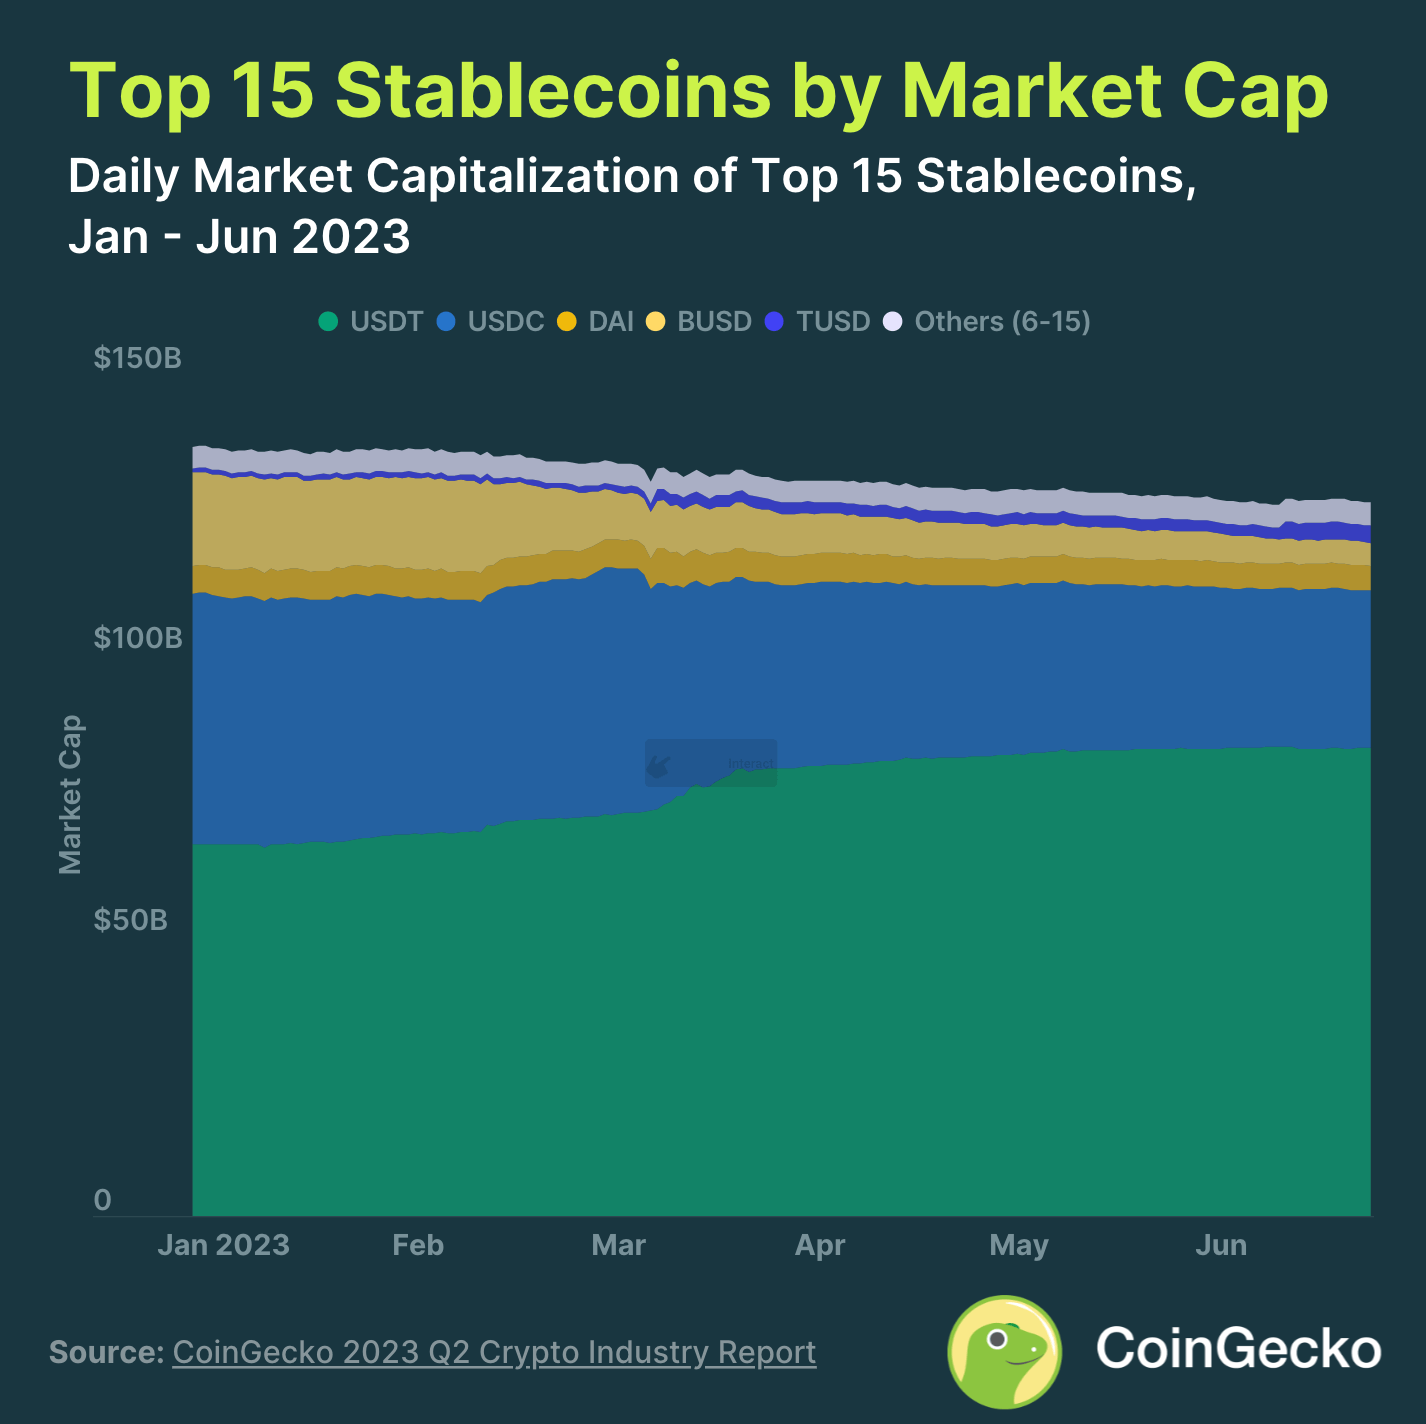 Top 15 Stablecoins by Market Cap